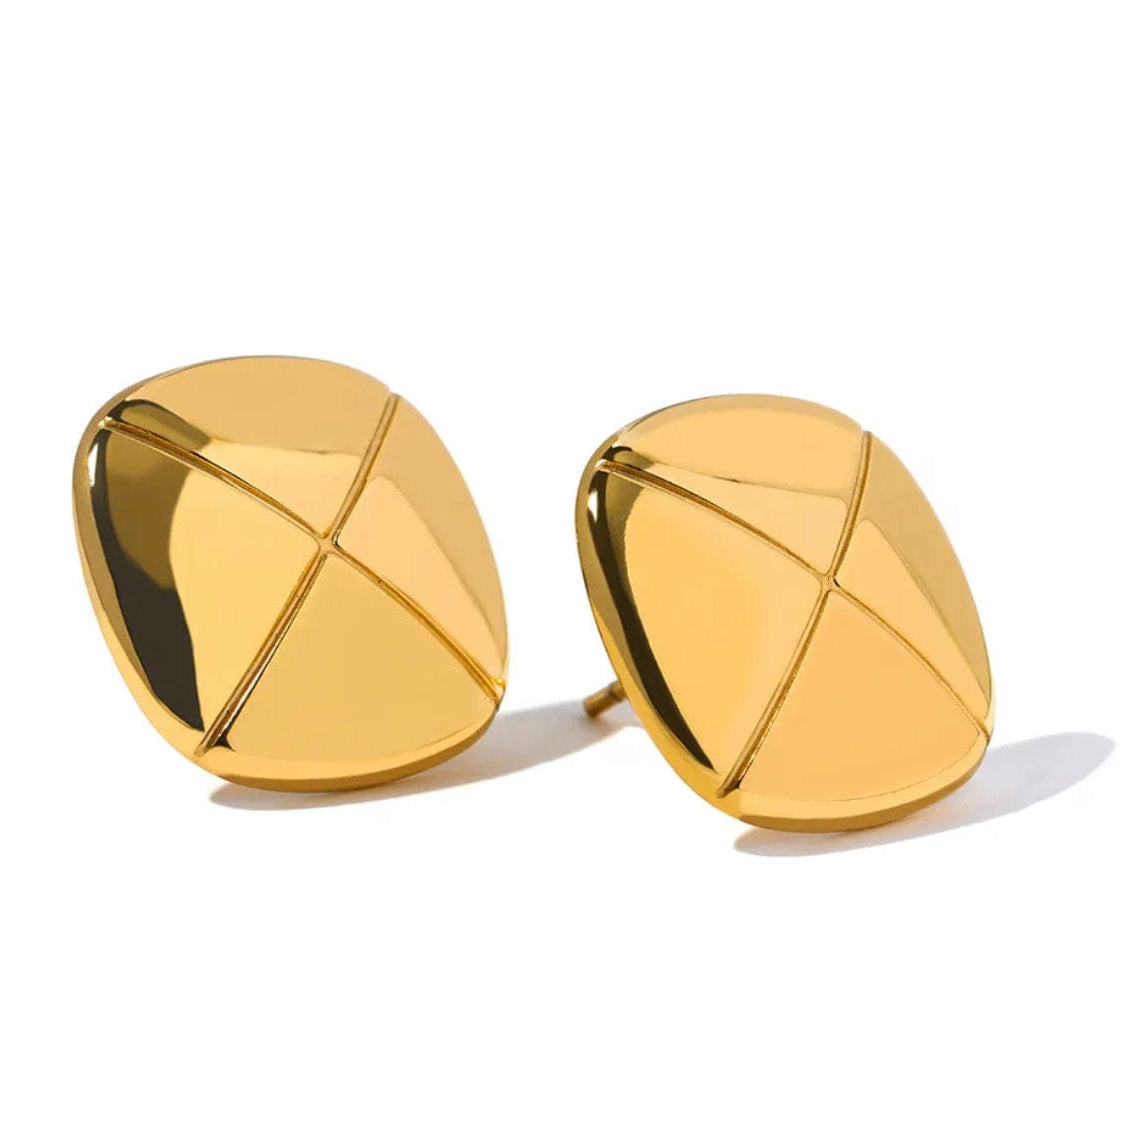 Dona Trend Jewelry Gold Squared Button Earrings